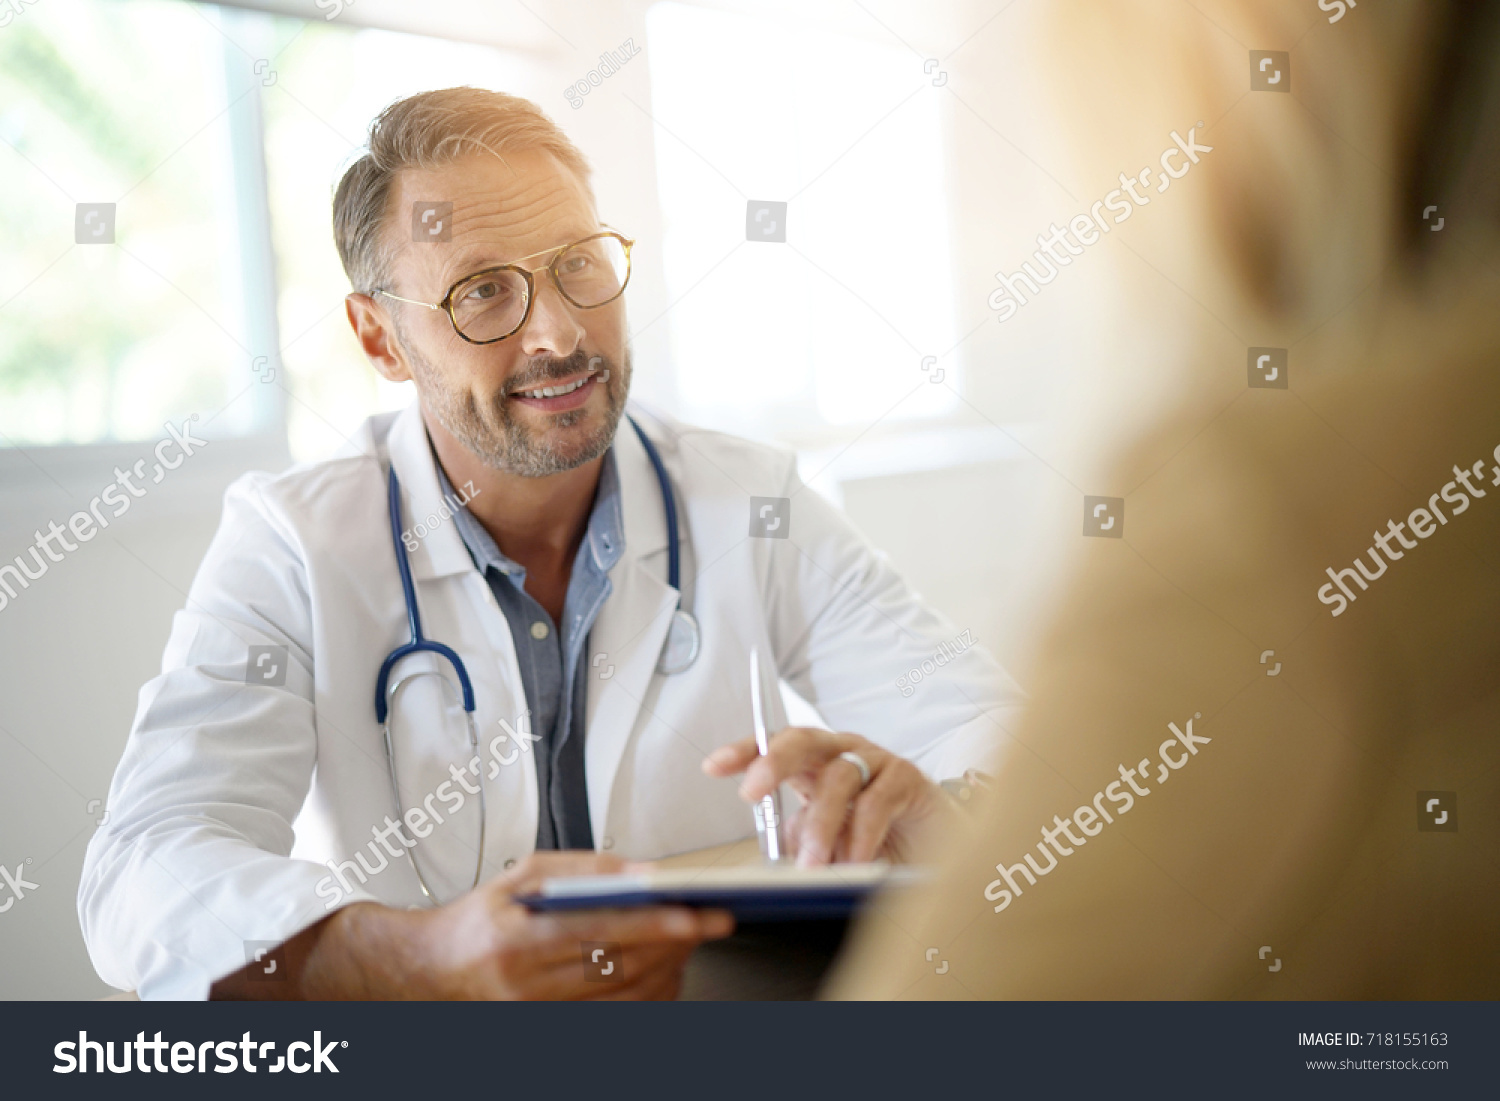 Doctor with patient in medical office #718155163